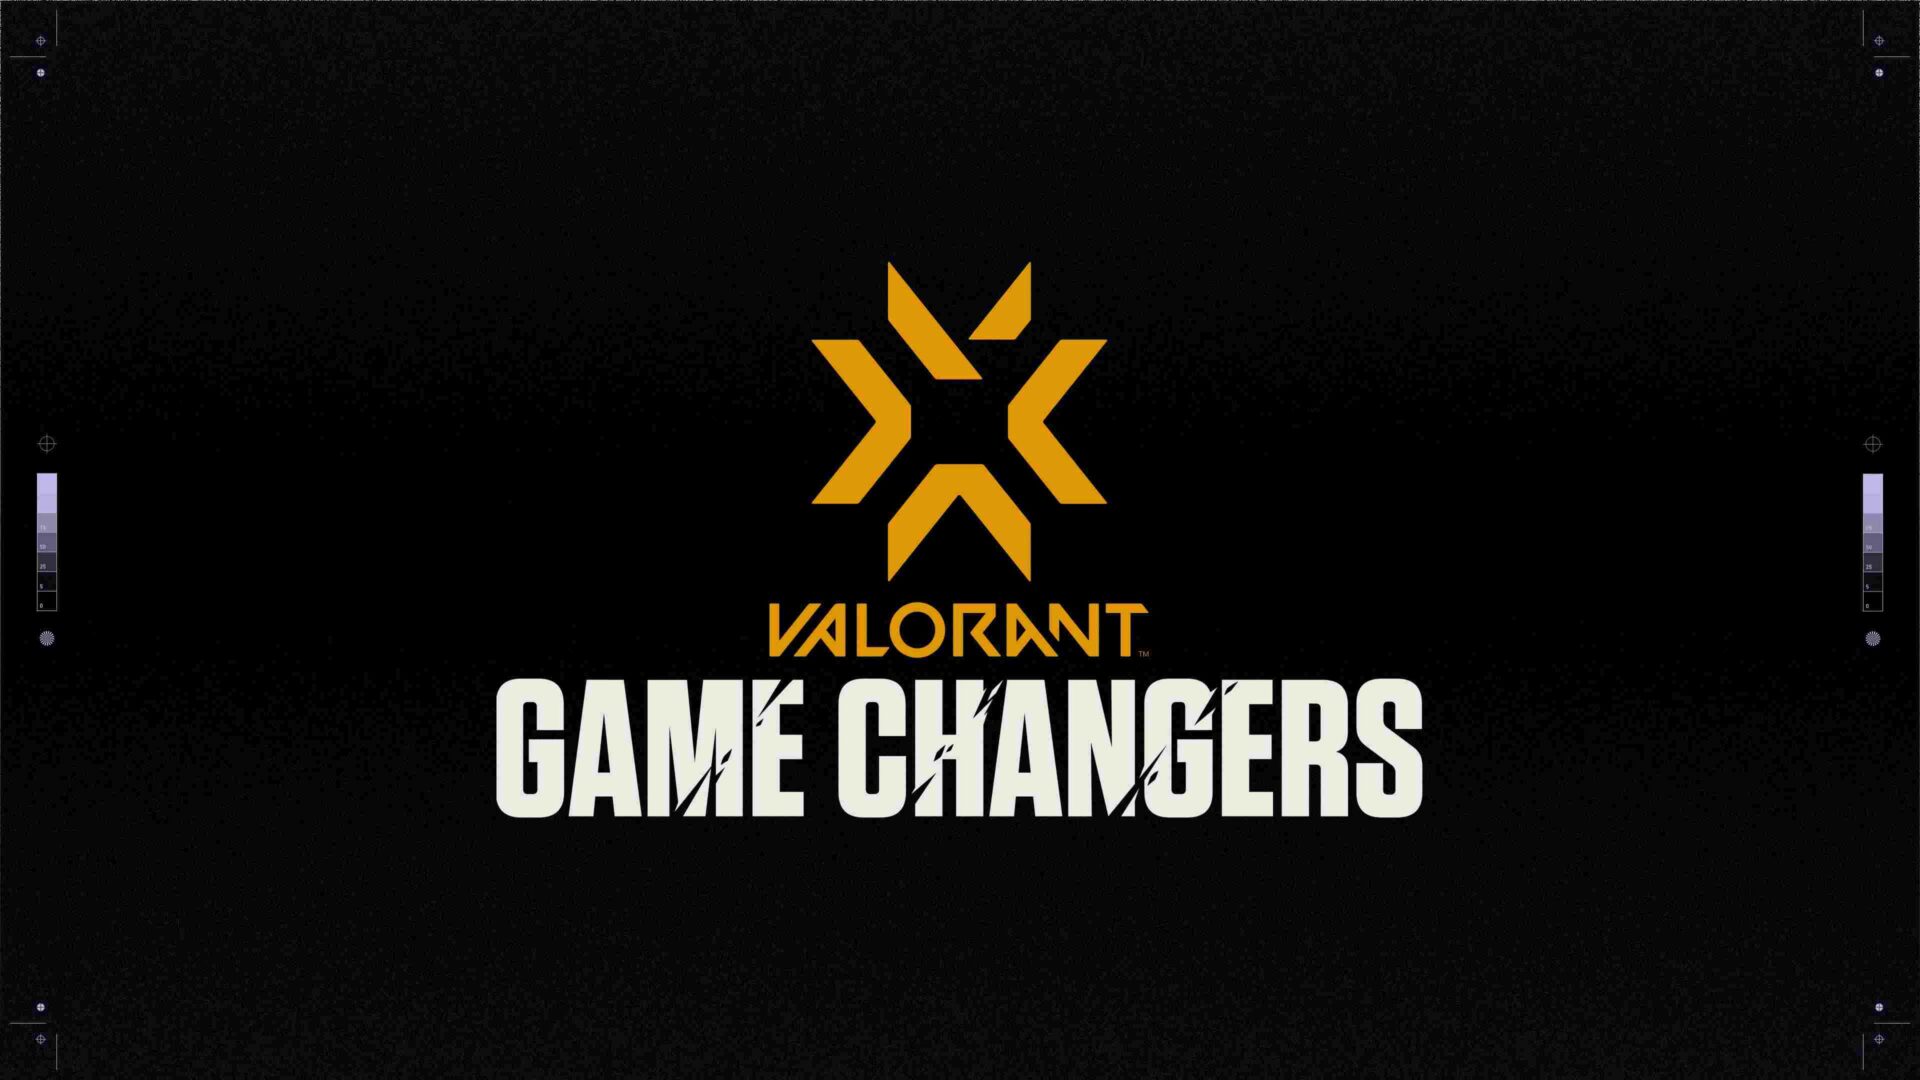 Slaze Valorant Know Her Side On The Ban From Game Changer Series